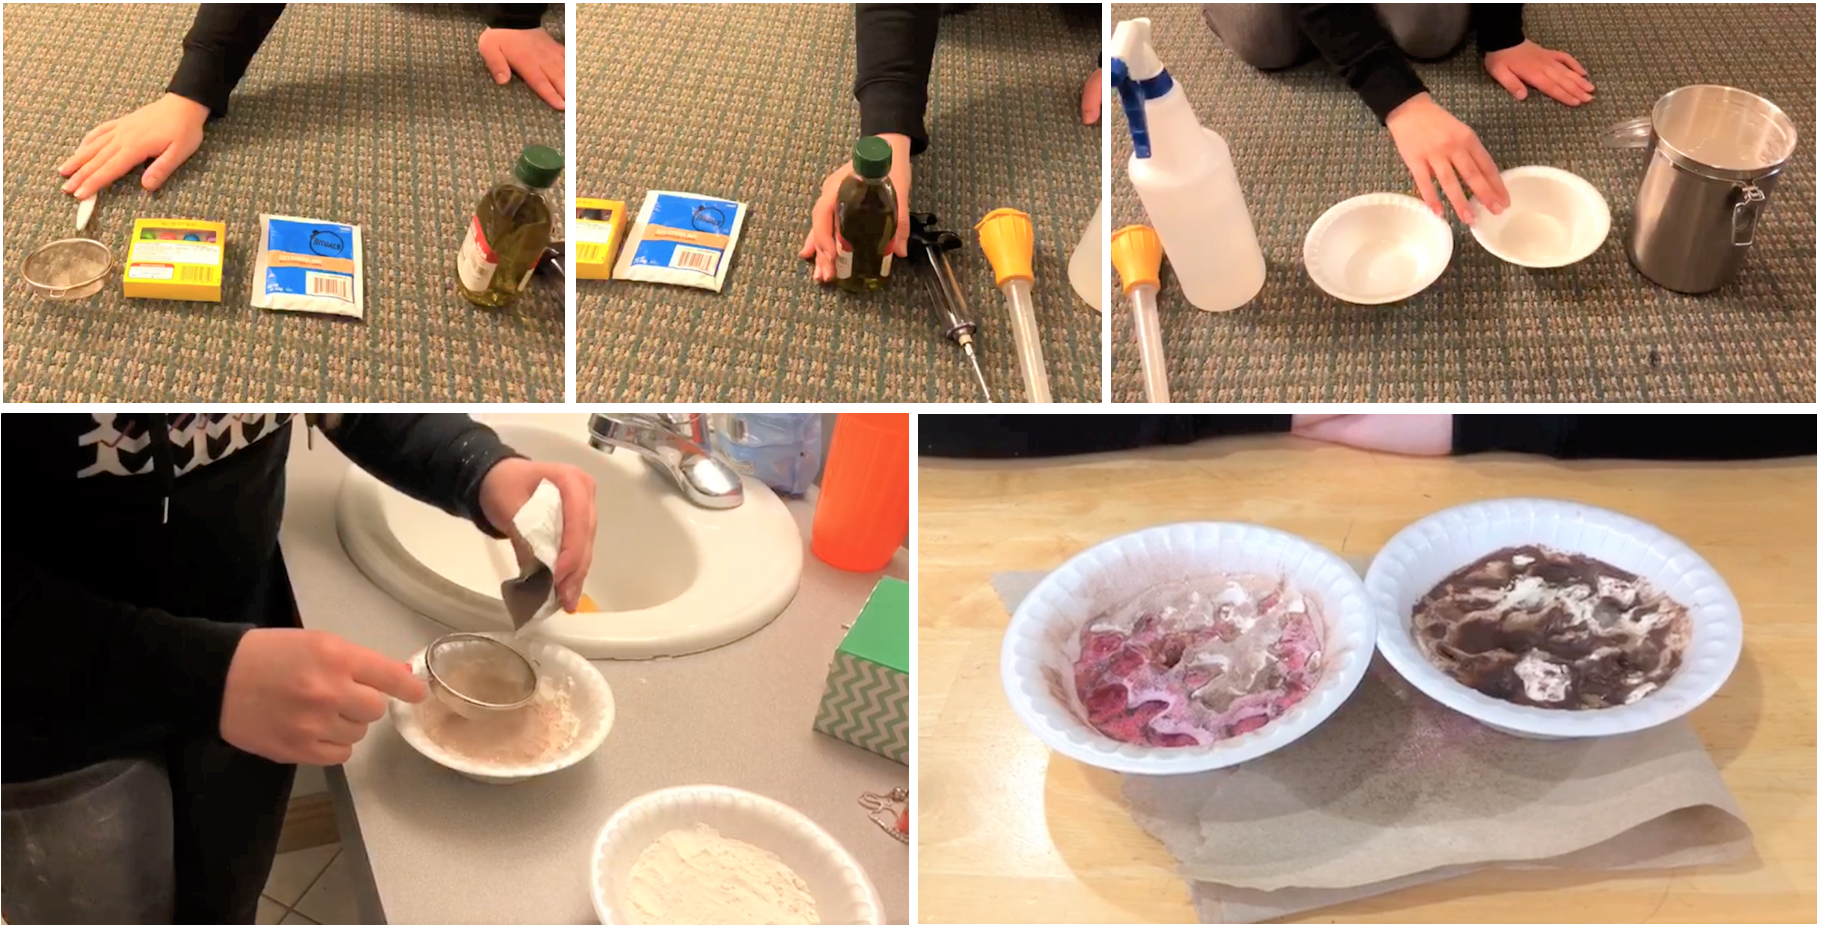 Five tiled images of the activity. Three images show common household items (flour, water, kitchen utensils, etc.).  One image shows student preparing layers of ingredients in a bowl.  Final image shows two bowls side-by-side with final results of activity.  One bowl has pink “lava” covering craters. The other bowl has brown “sediment” covering craters.